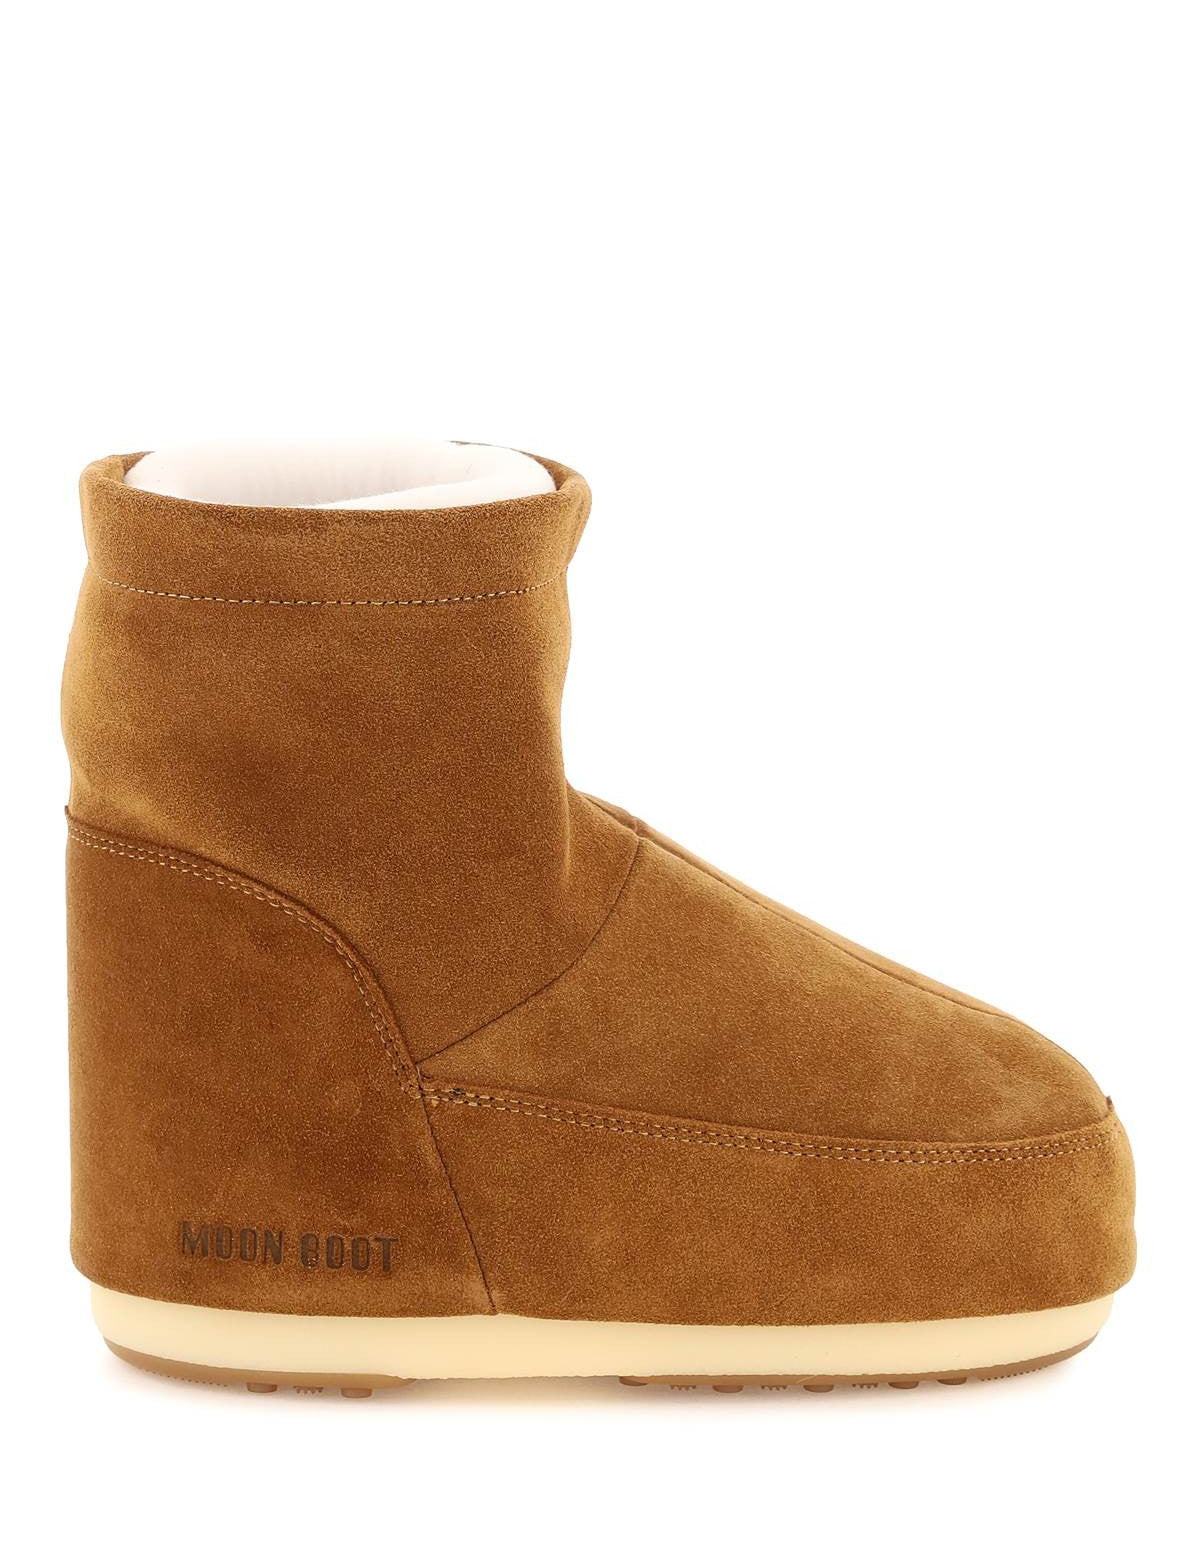 moon-boot-icon-low-suede-snow-boots.jpg